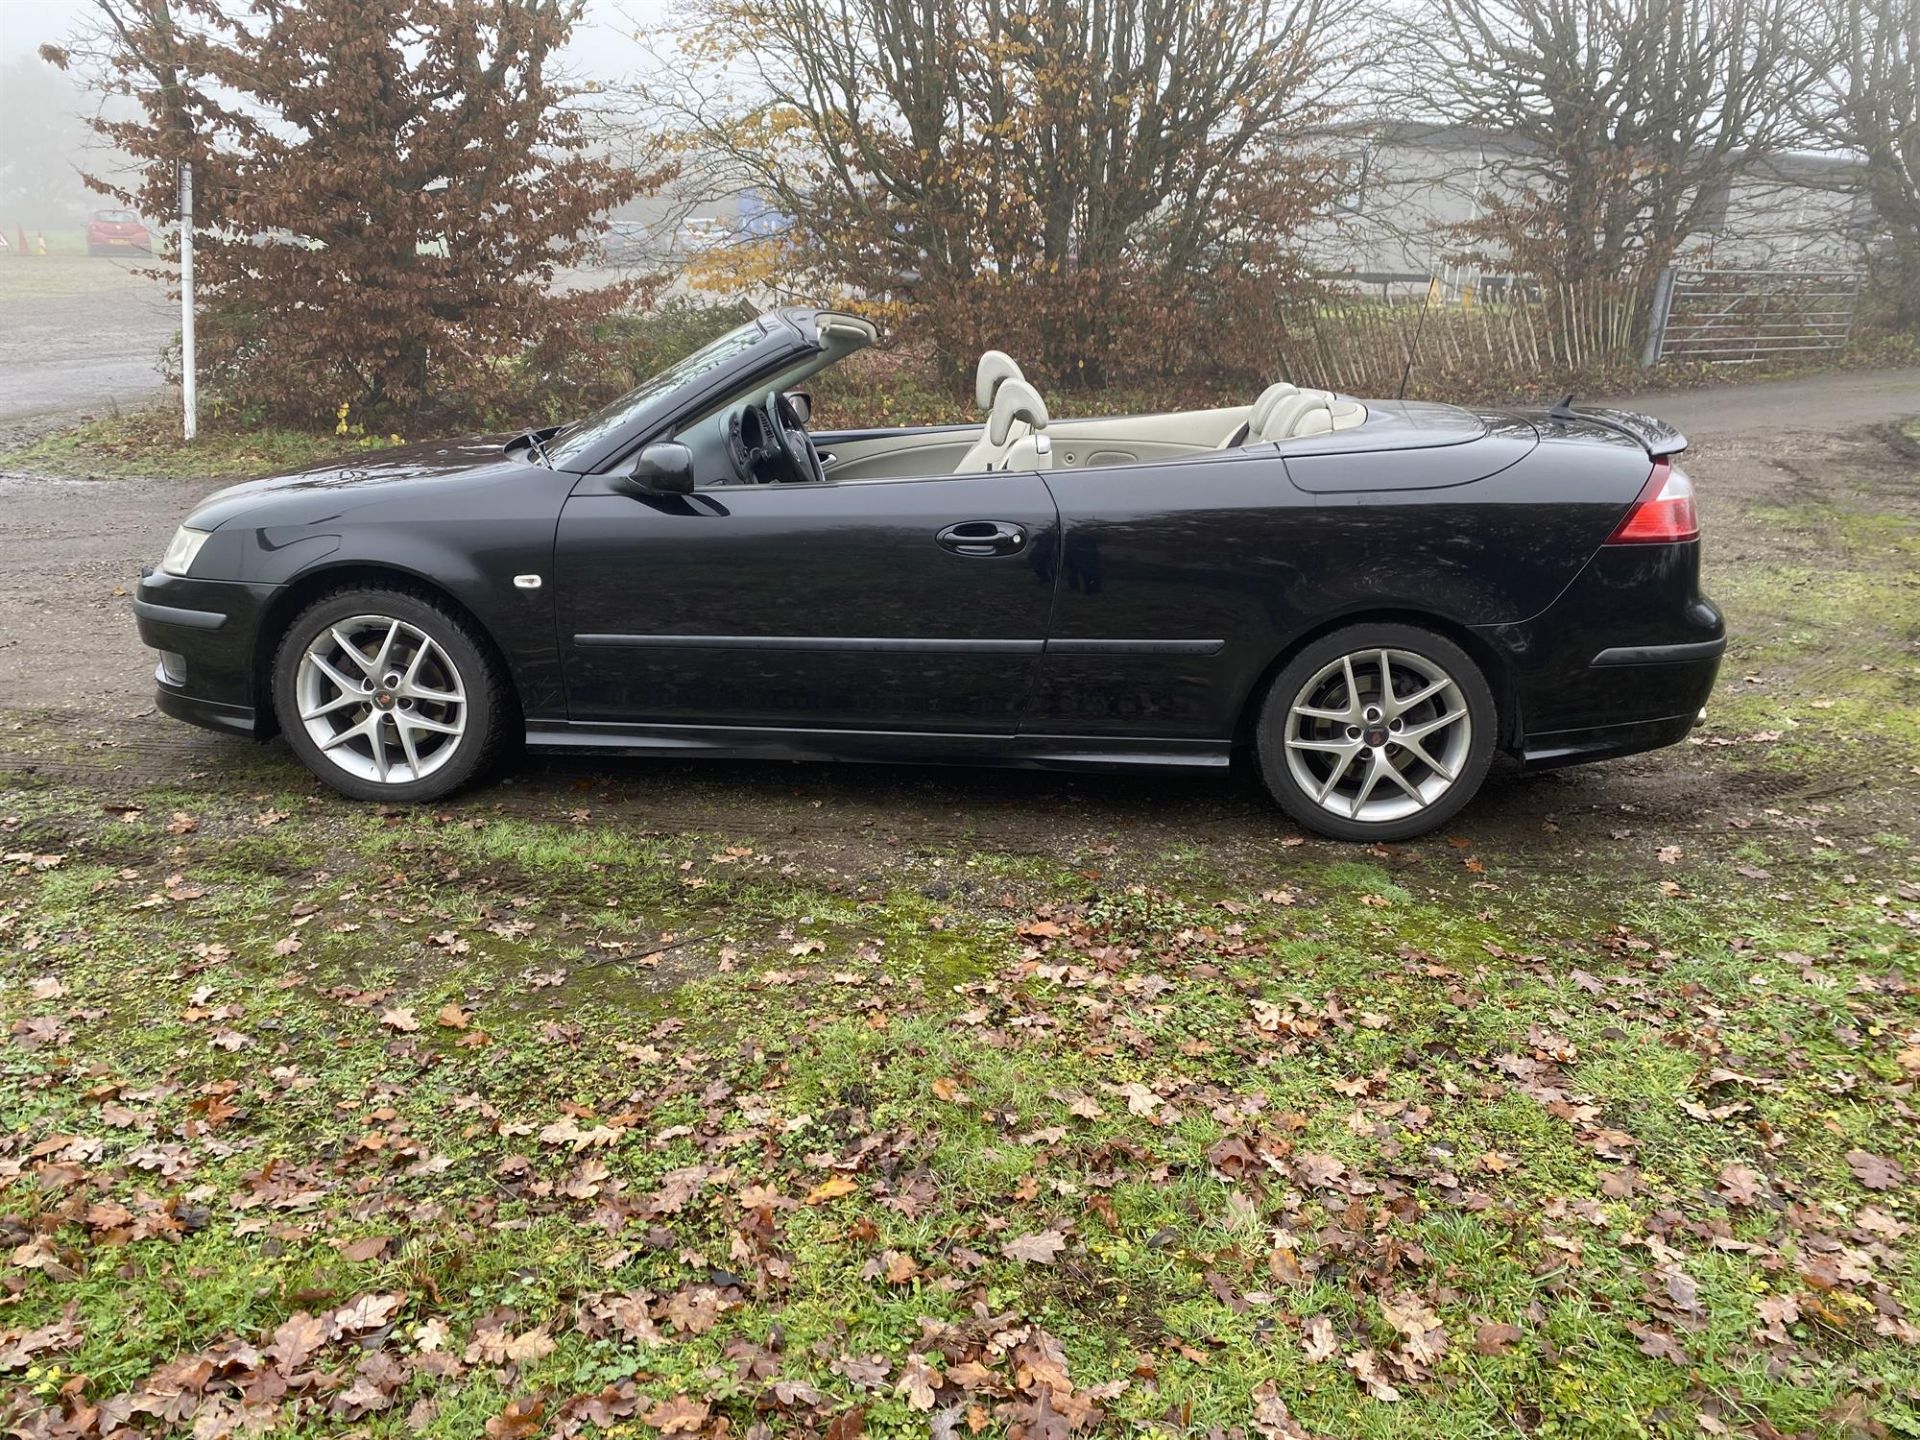 2005 Saab 9-3 AERO convertible. 210bhp manual gearbox. Car has had a revamp for BHP and maybe - Image 4 of 10